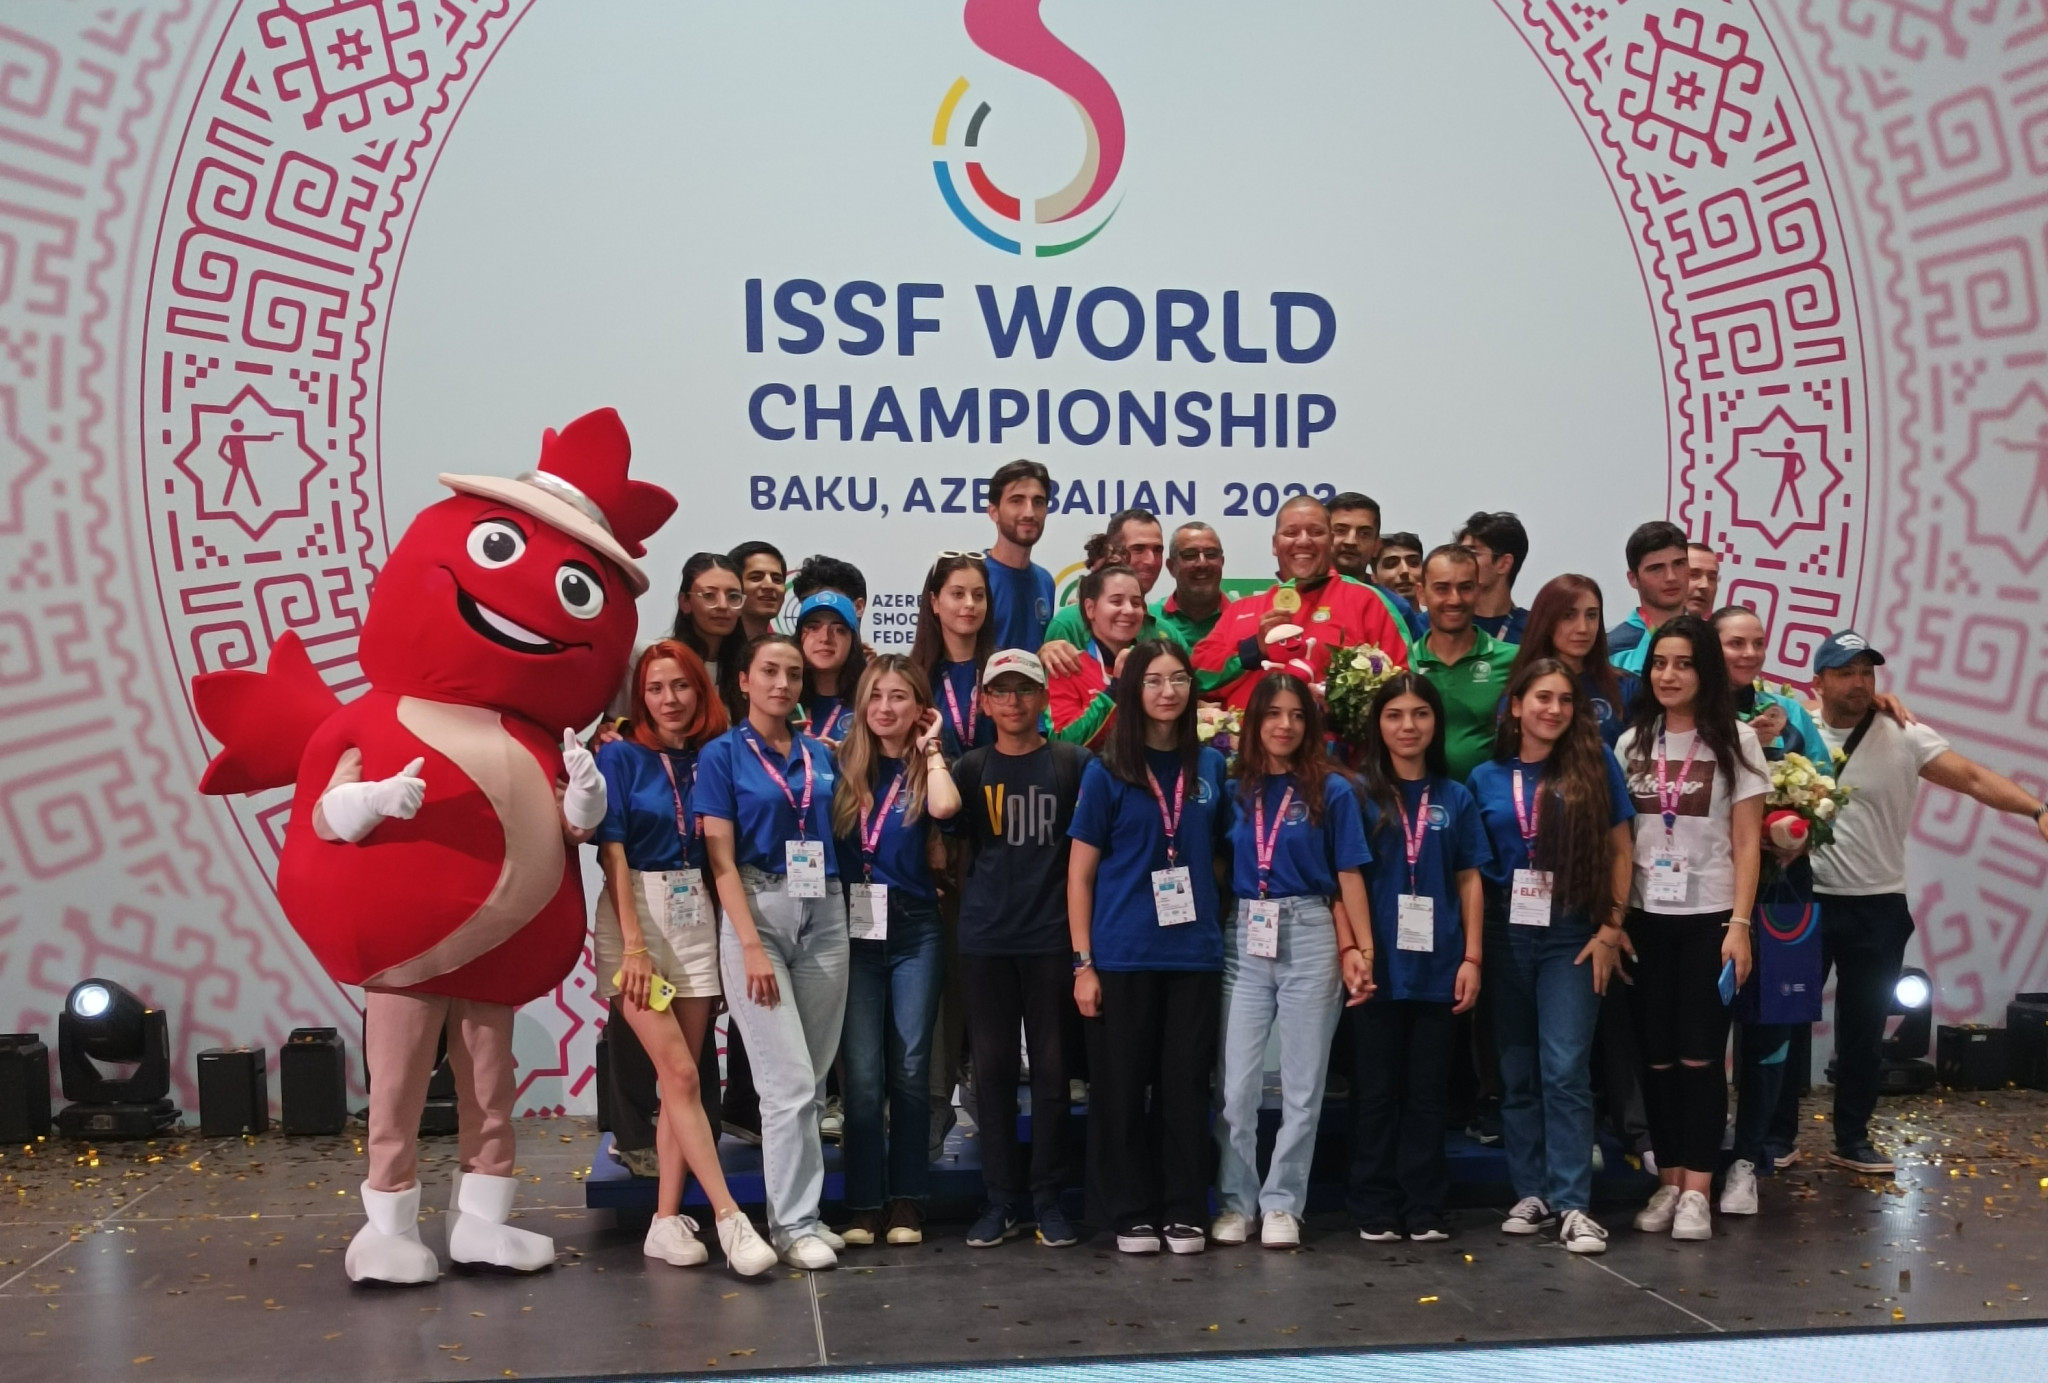 The volunteers at the ISSF World Shooting Championships have taken every possible opportunity to have a photograph with medallists ©ITG